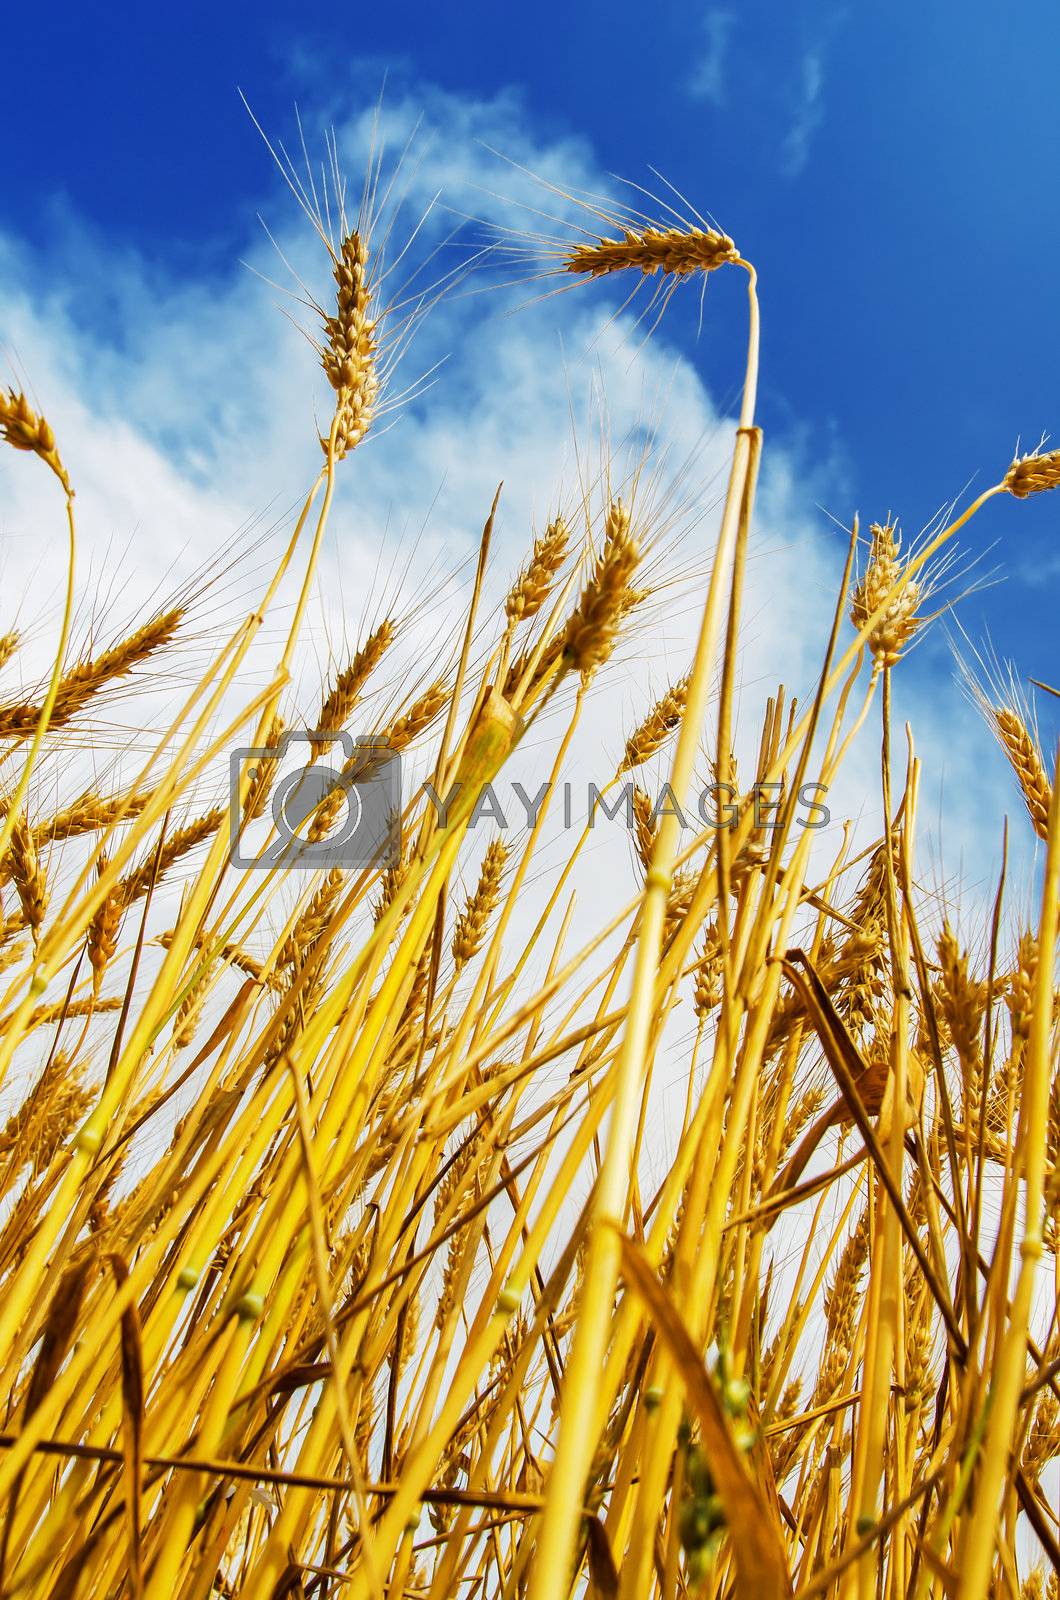 Royalty free image of wheat field and blue sky with clouds by mycola